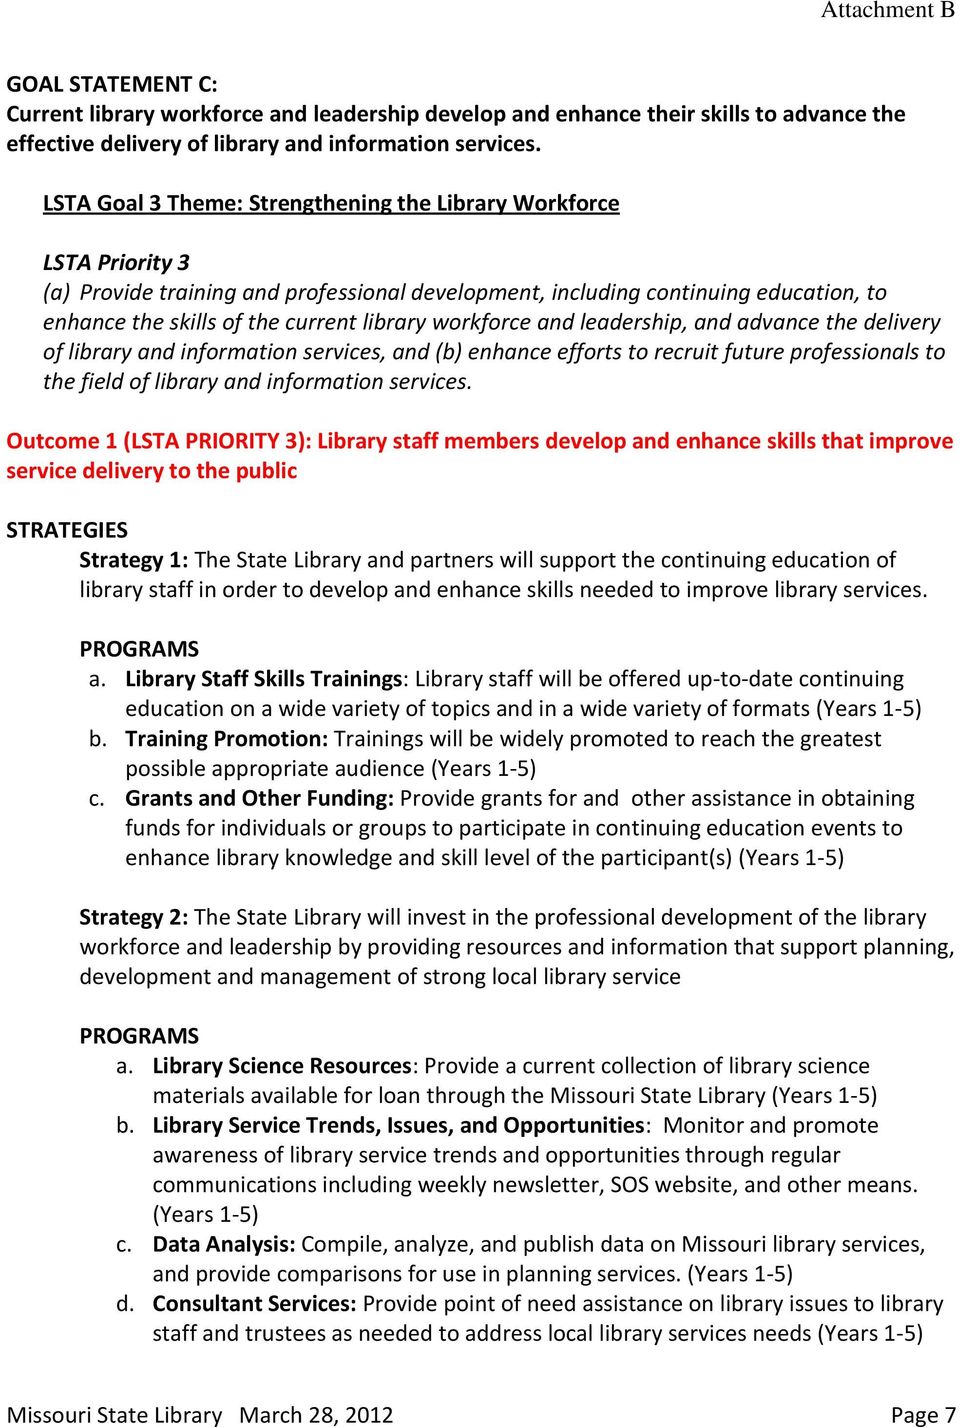 workforce and leadership, and advance the delivery of library and information services, and (b) enhance efforts to recruit future professionals to the field of library and information services.